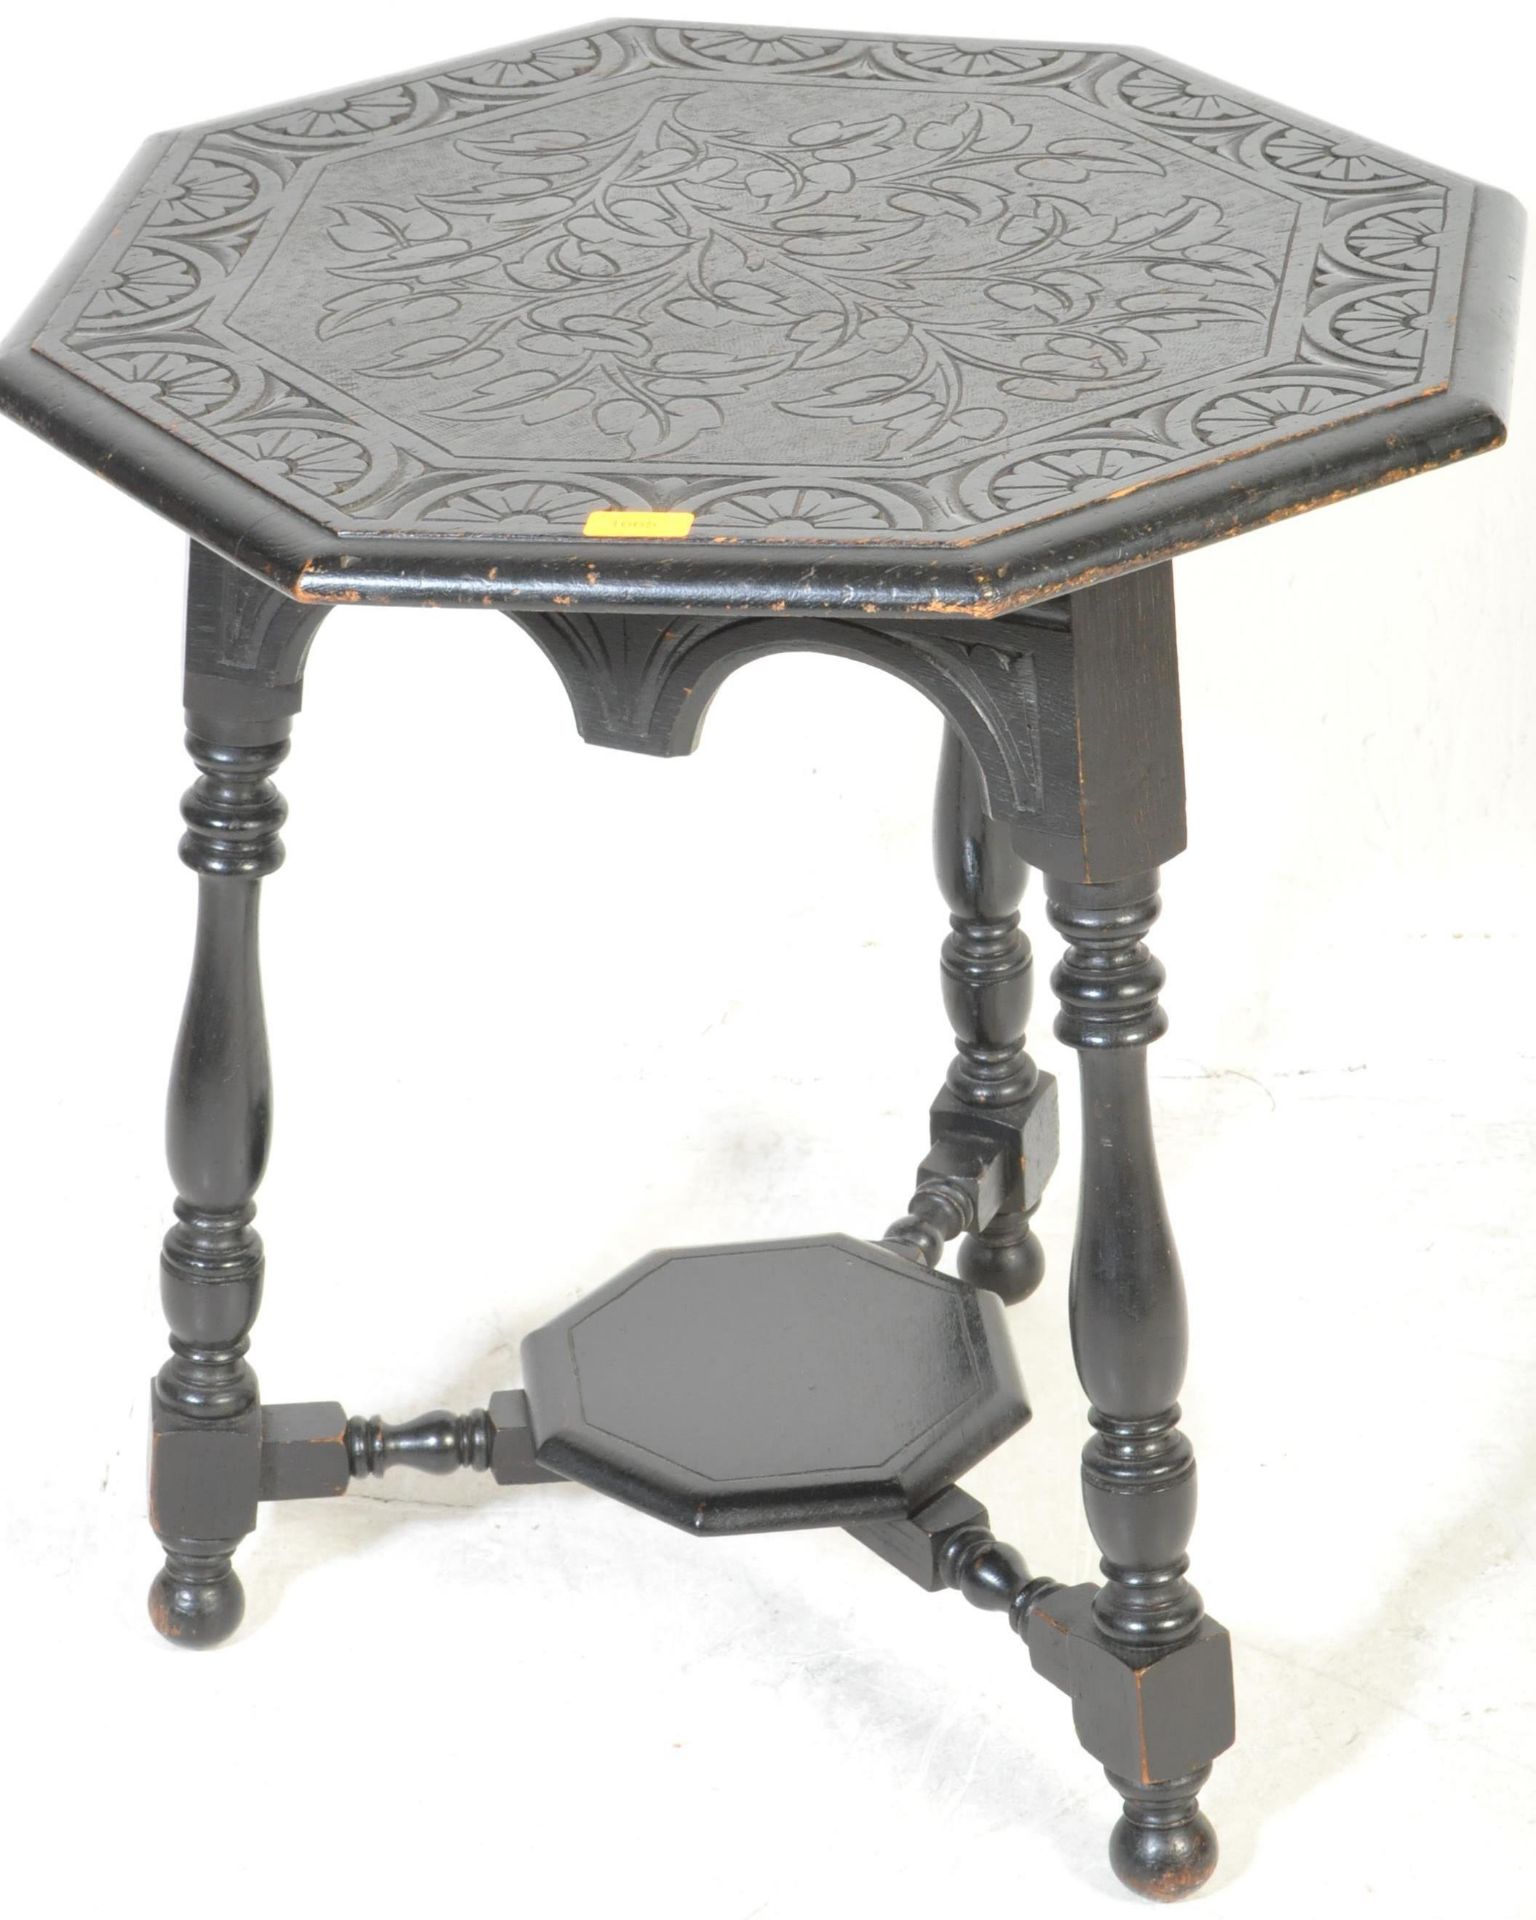 19TH CENTURY VICTORIAN CARVED PENNY CENTRE TABLE